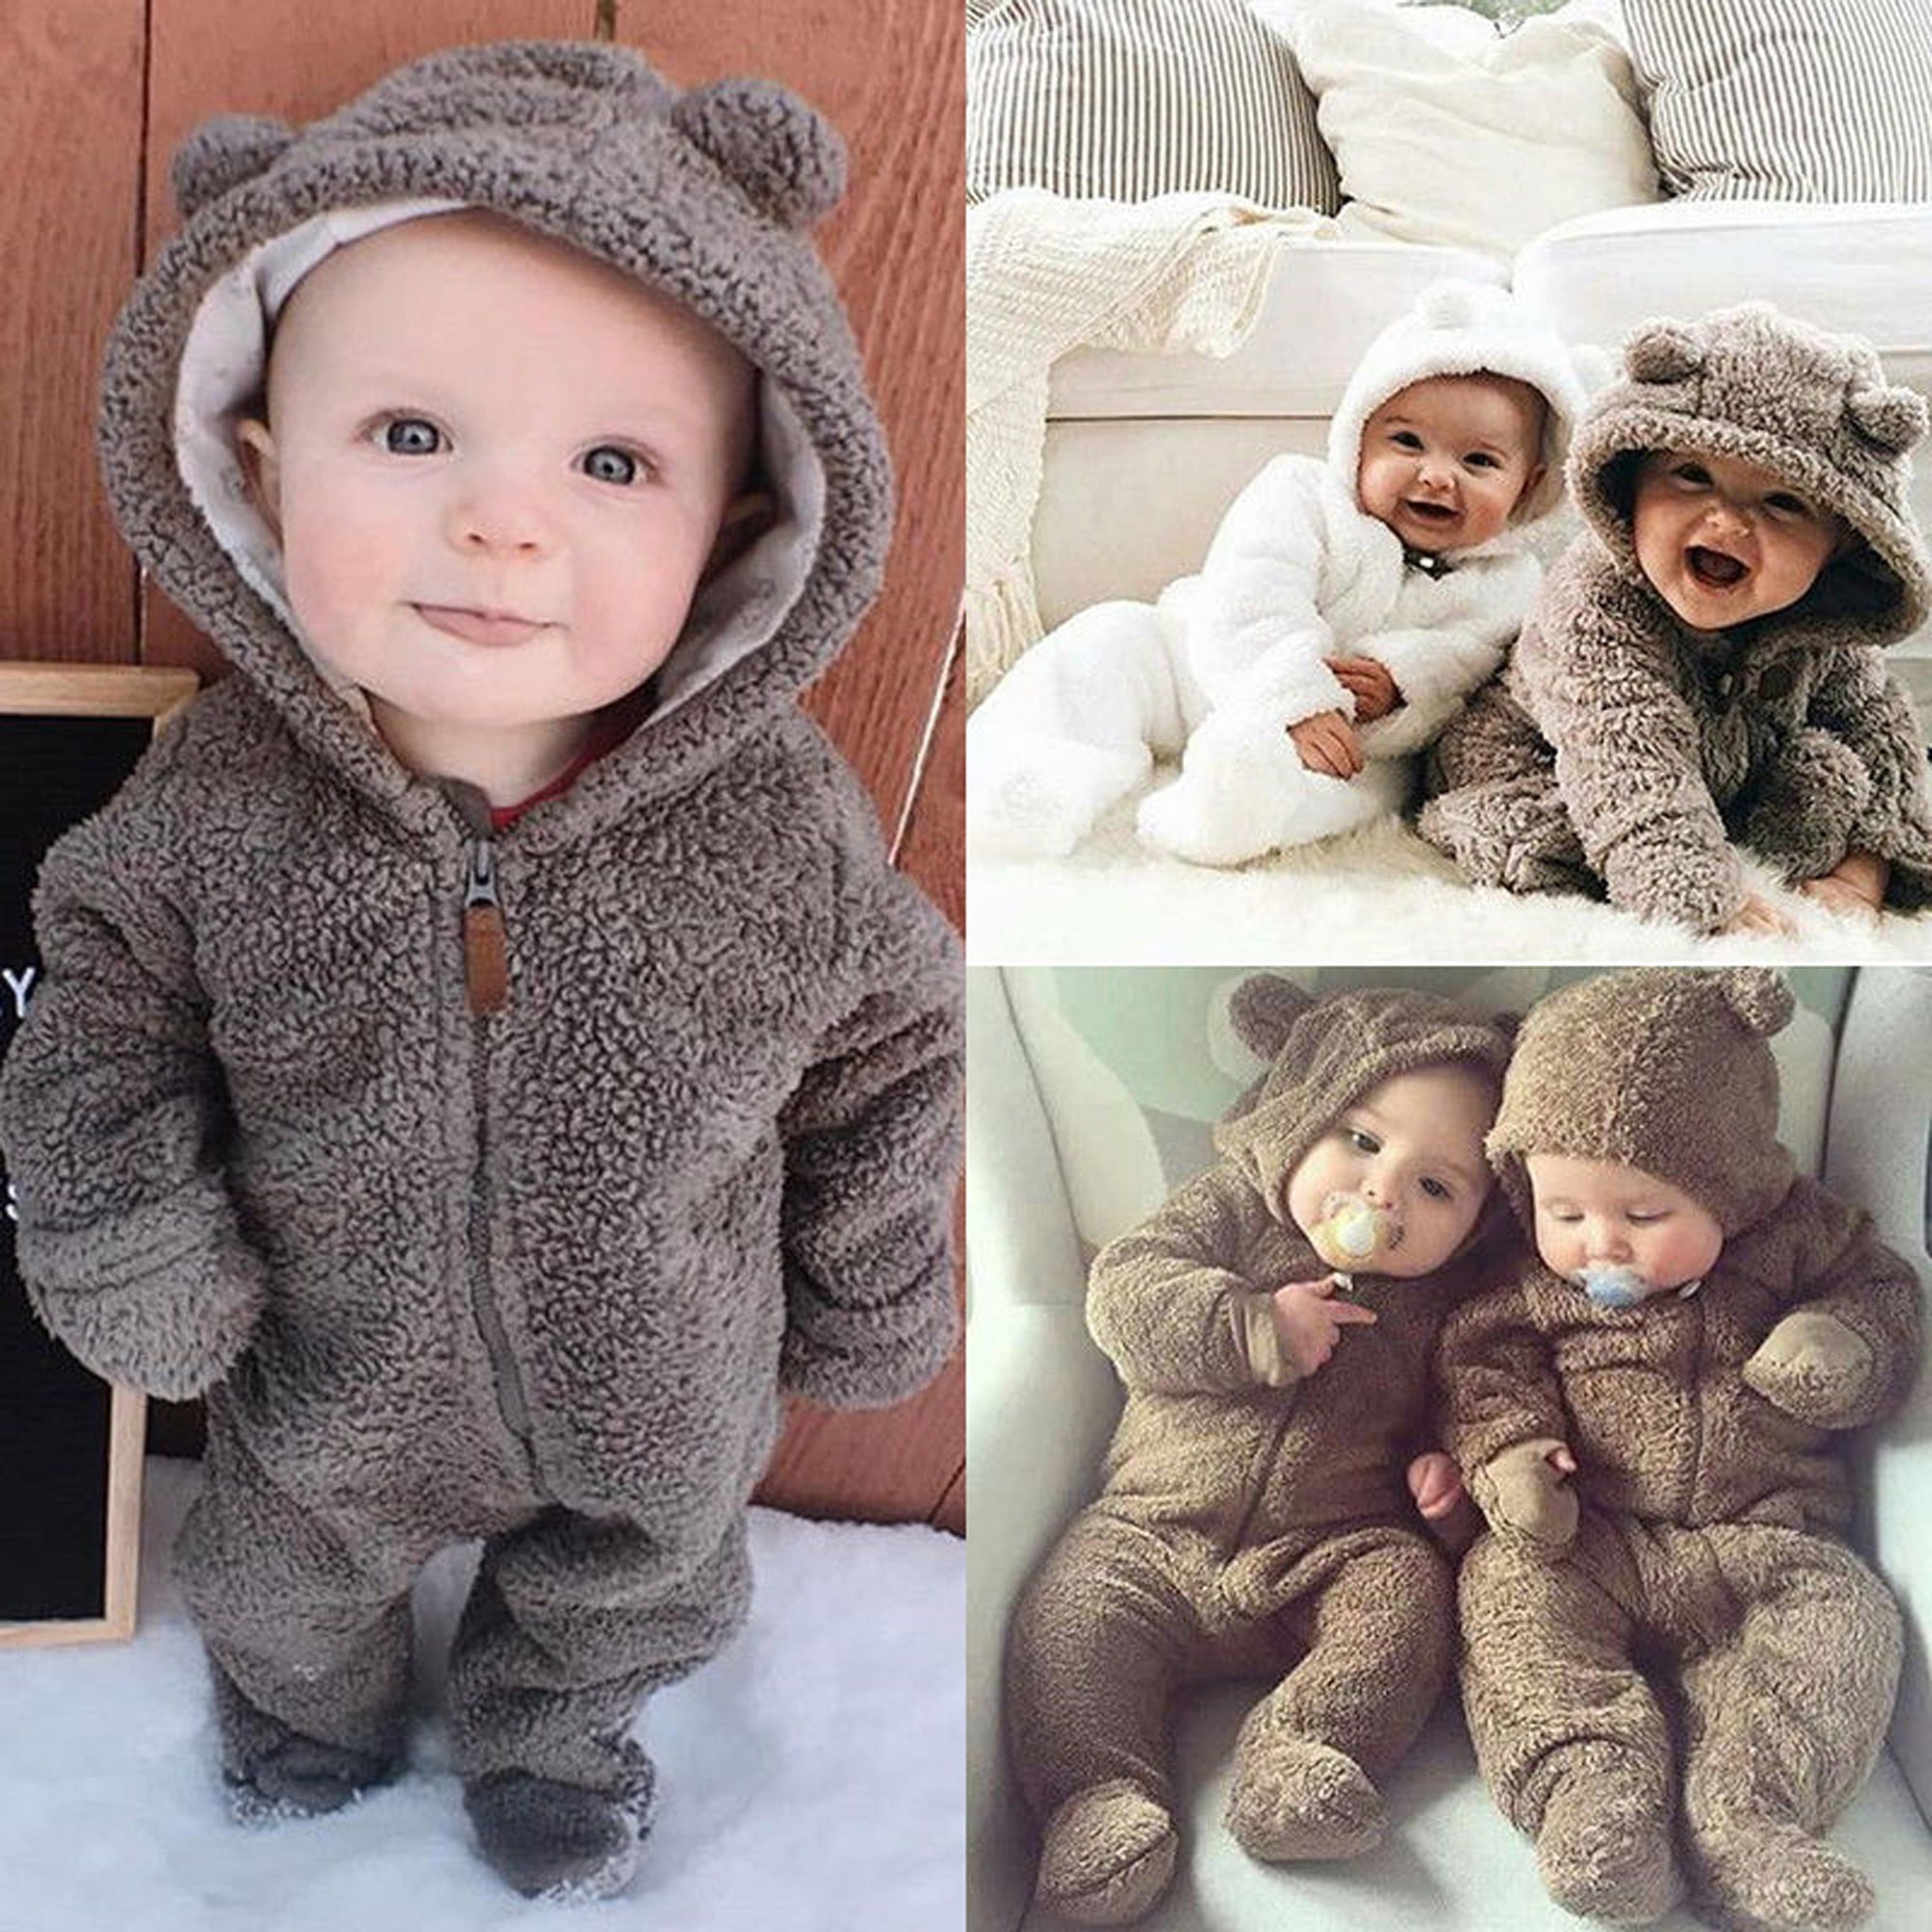 GRNSHTS Baby Boys Girls Knitted Jumpsuit Unisex Toddler Long Sleeve Solid Color with Headband Romper Autumn Winter Outfit